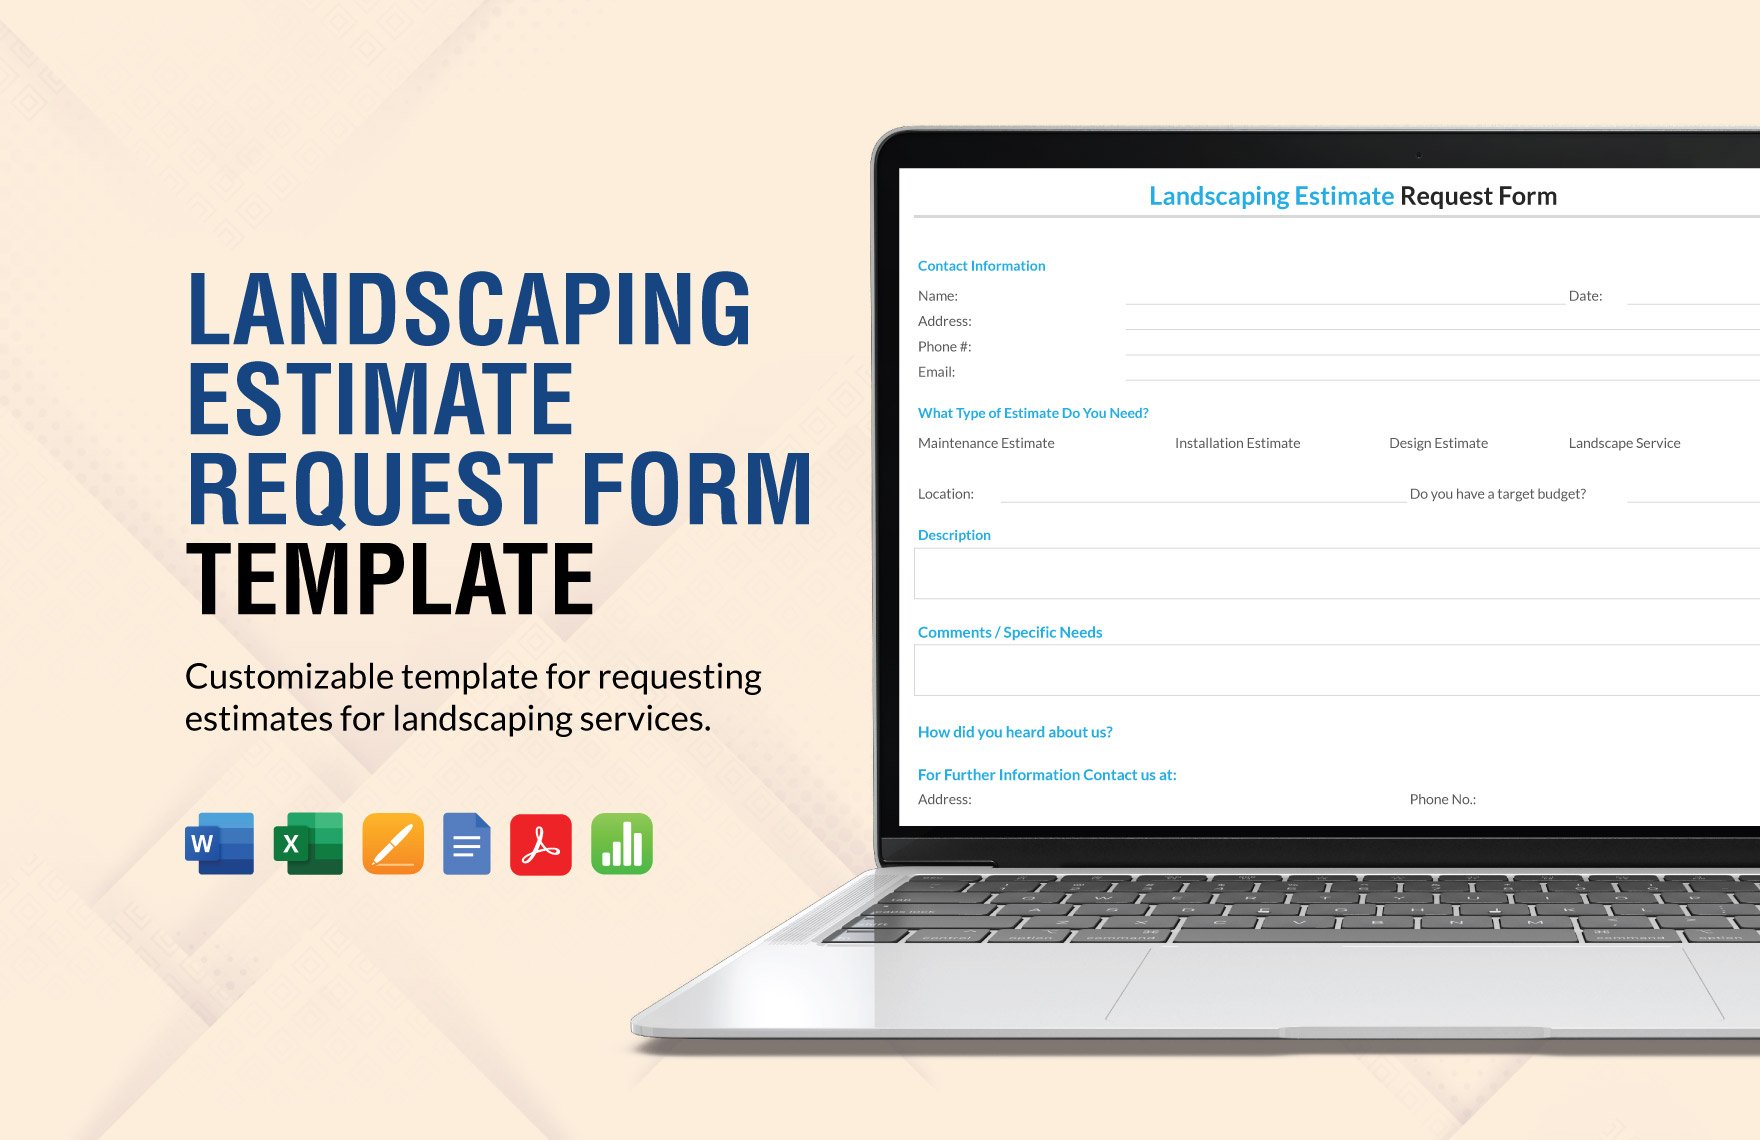 Landscaping Estimate Request Form Template in Word, Google Docs, Excel, PDF, Apple Pages, Apple Numbers